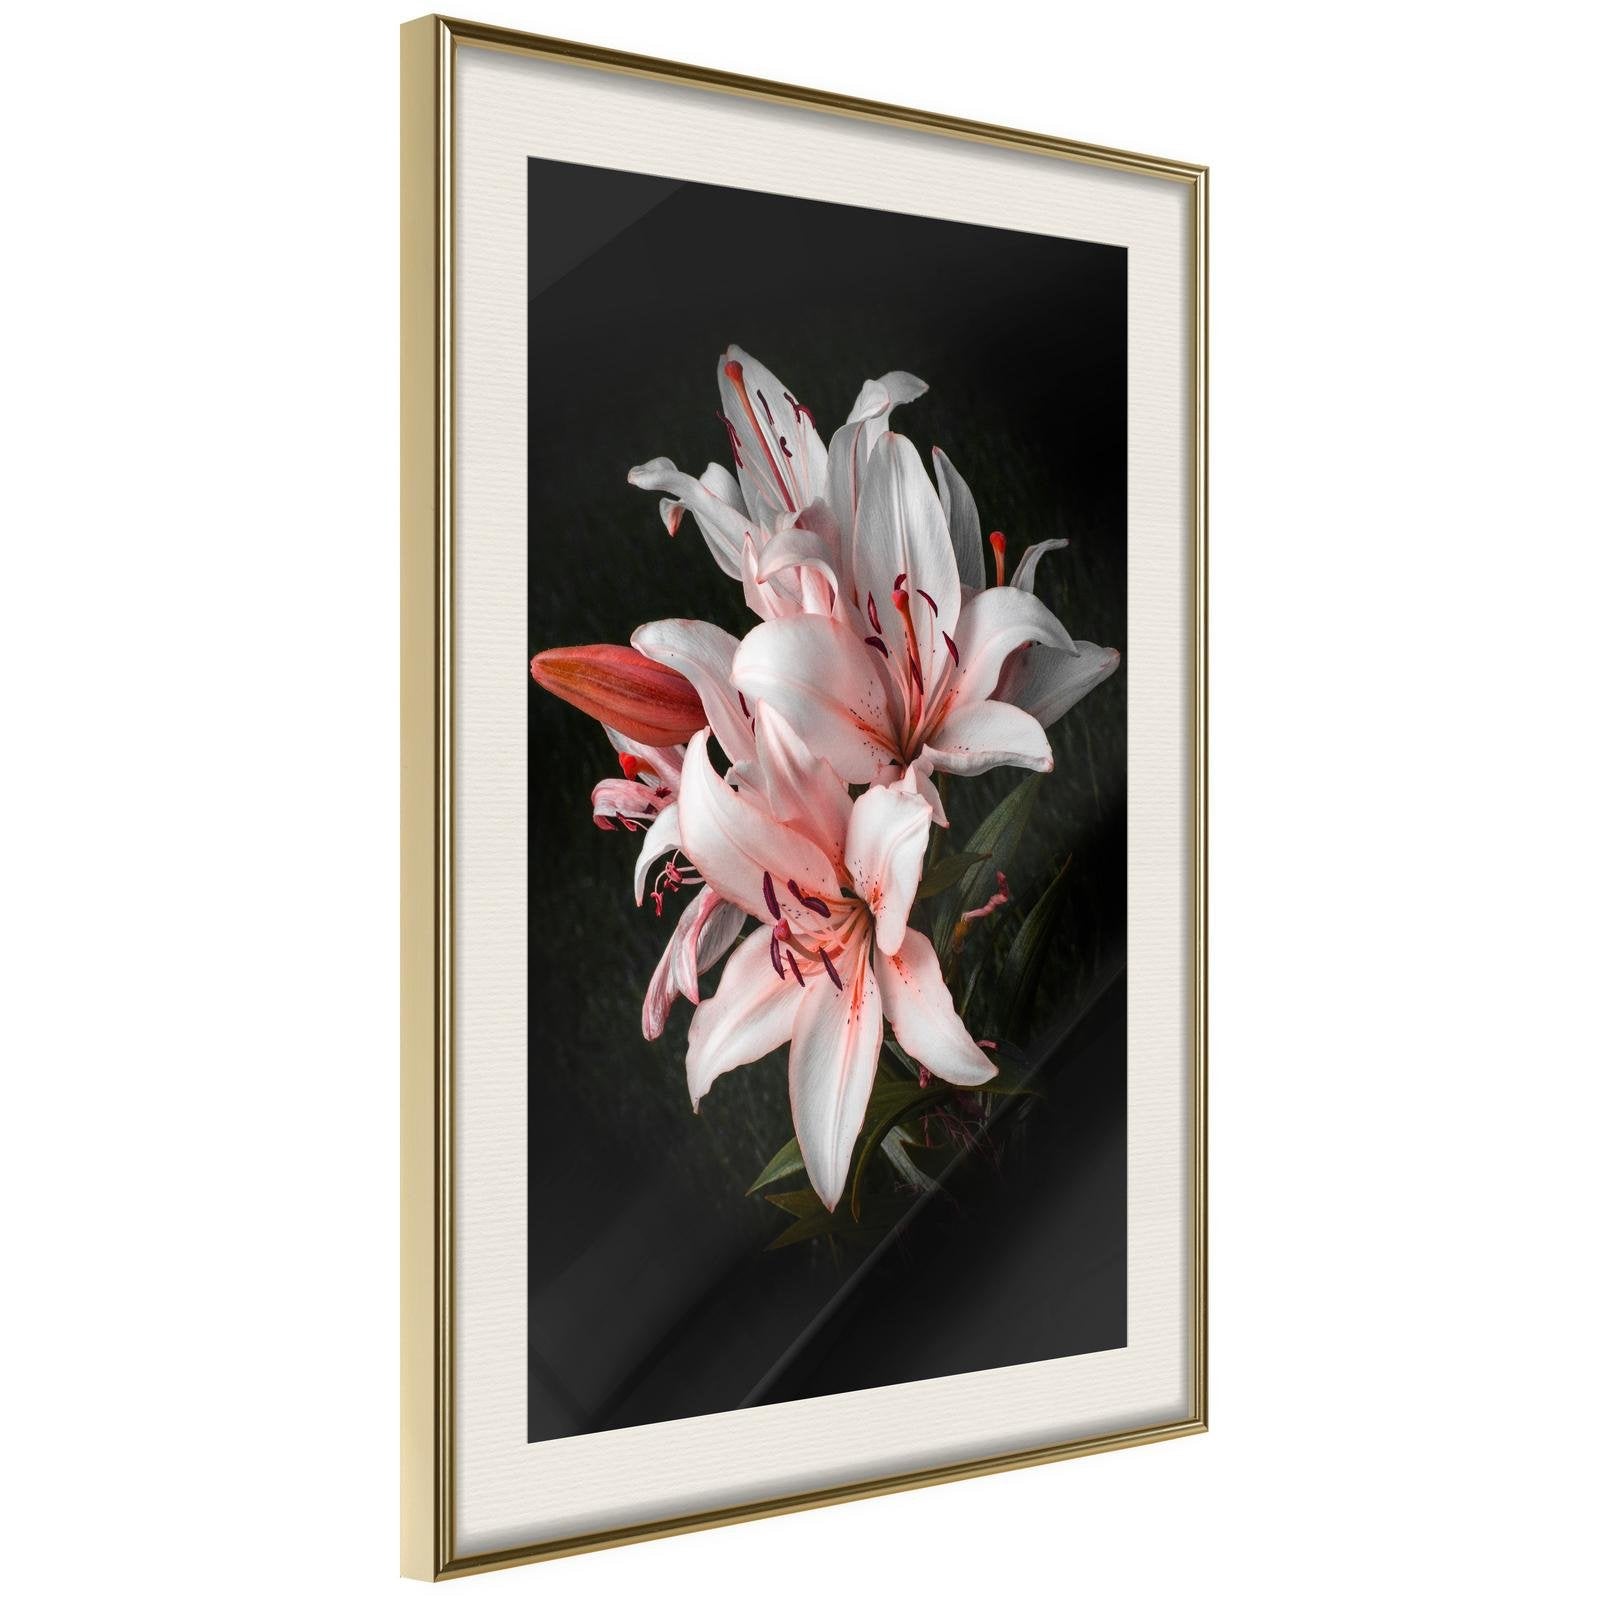 Inramad Poster / Tavla - Pale Pink Lilies-Poster Inramad-Artgeist-20x30-Guldram med passepartout-peaceofhome.se